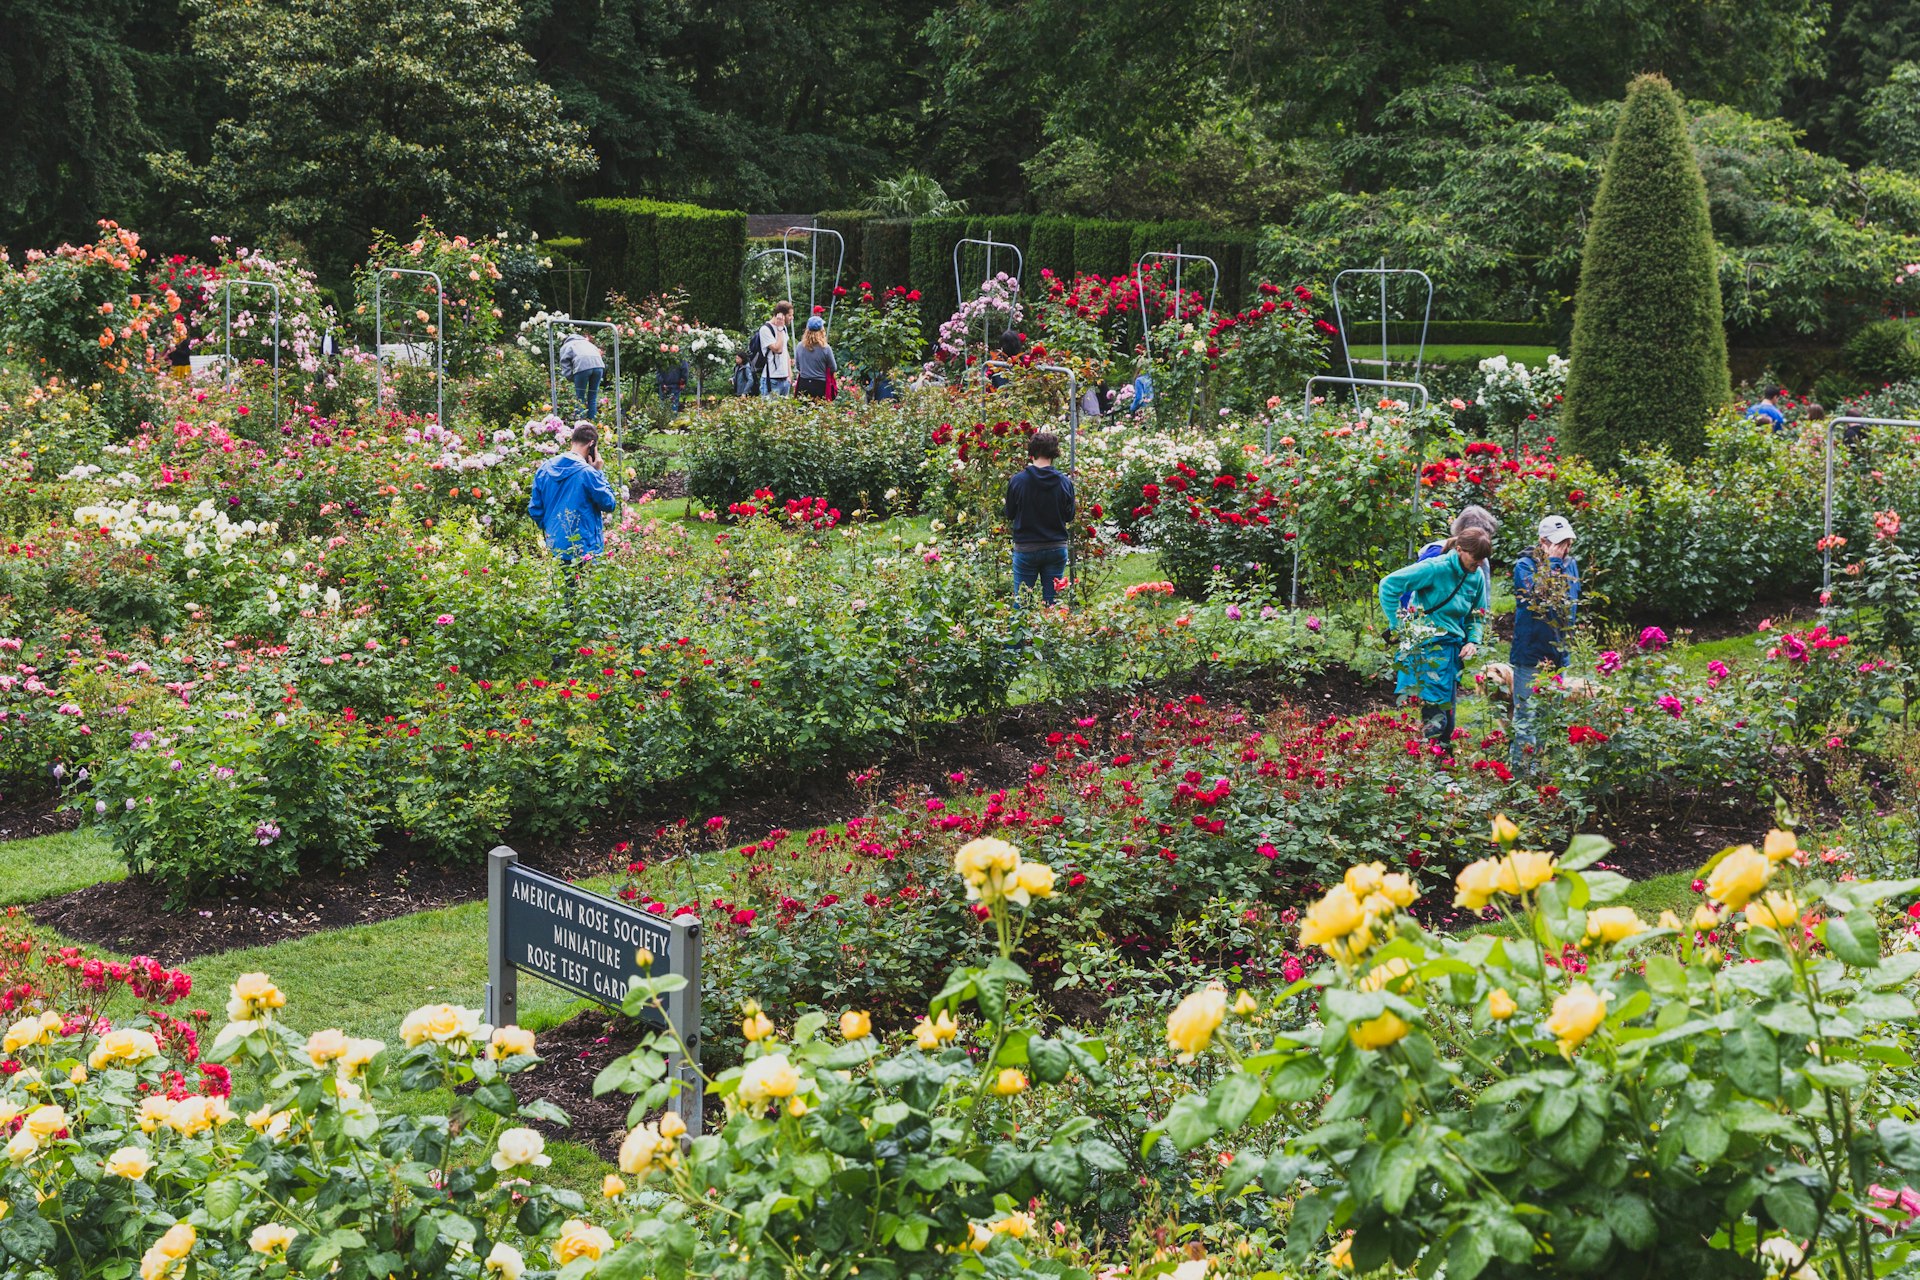 Visitors viewing roses at the International Rose Test Garden